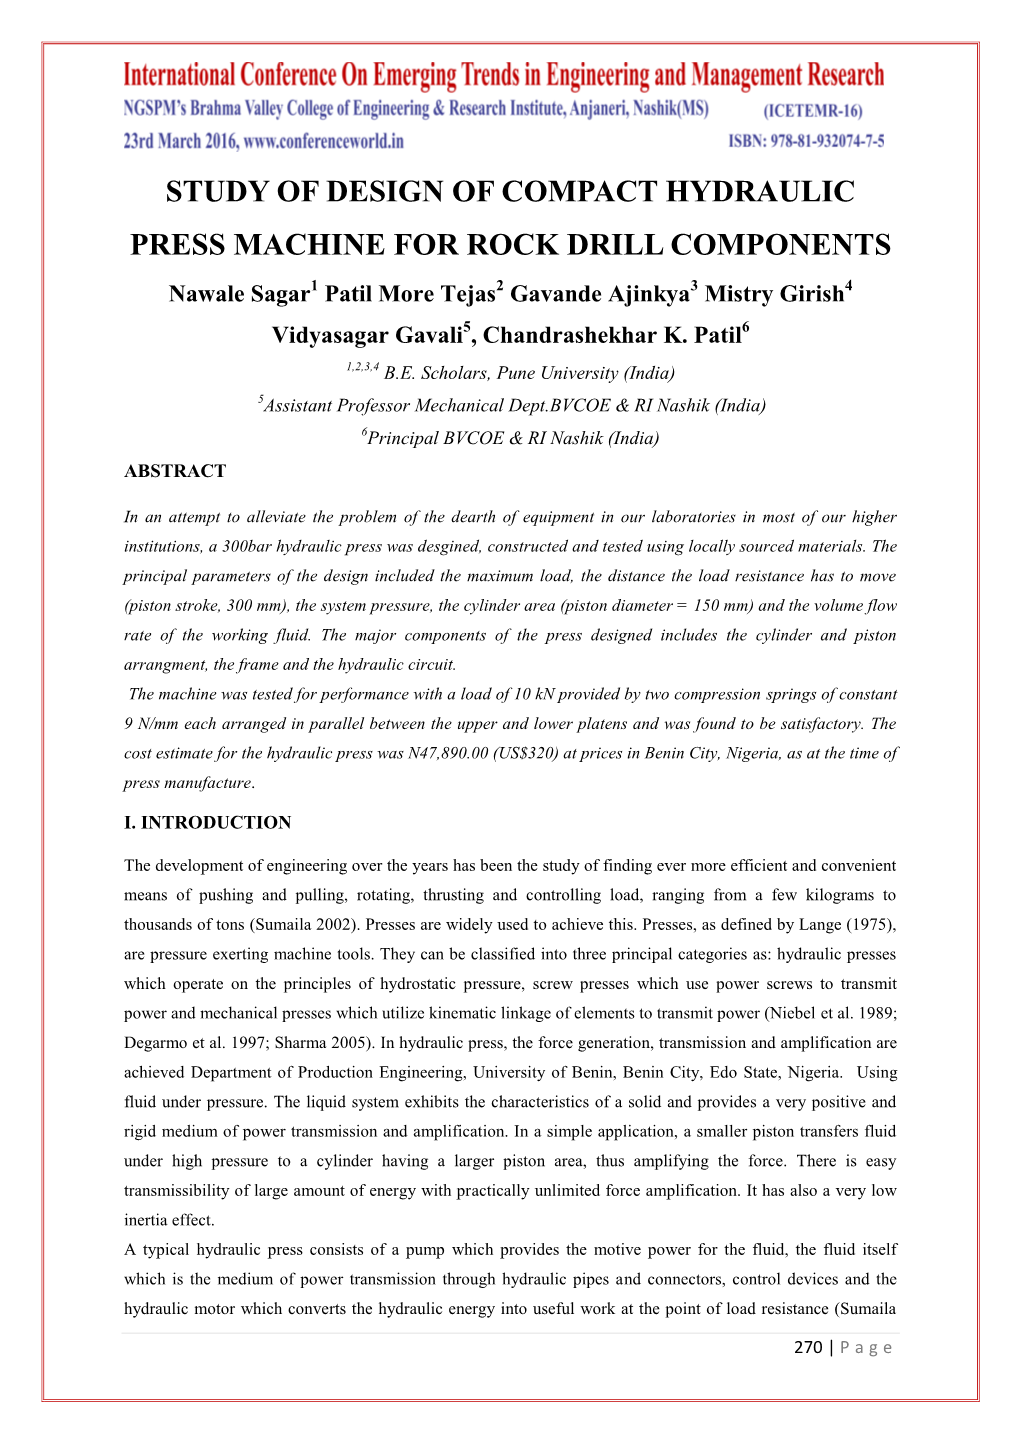 Study of Design of Compact Hydraulic Press Machine for Rock Drill Components